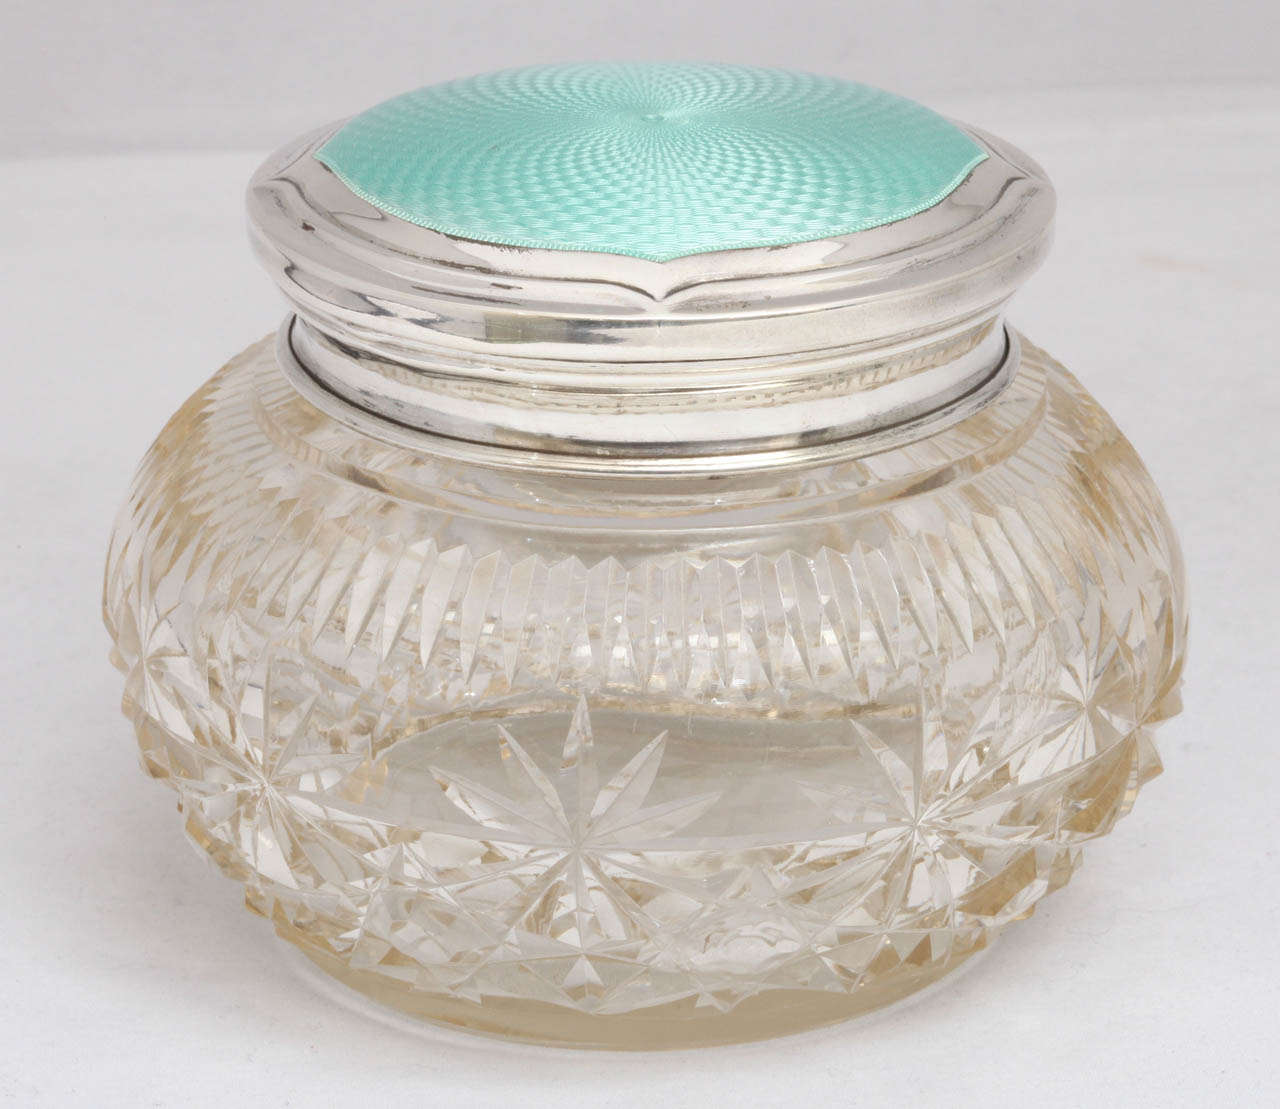 Art Deco, cut crystal powder jar, mounted by a sterling silver and turquoise guilloche enamel lid, Birmingham, England, 1925, Levi & Salamon - makers. @3 3/4